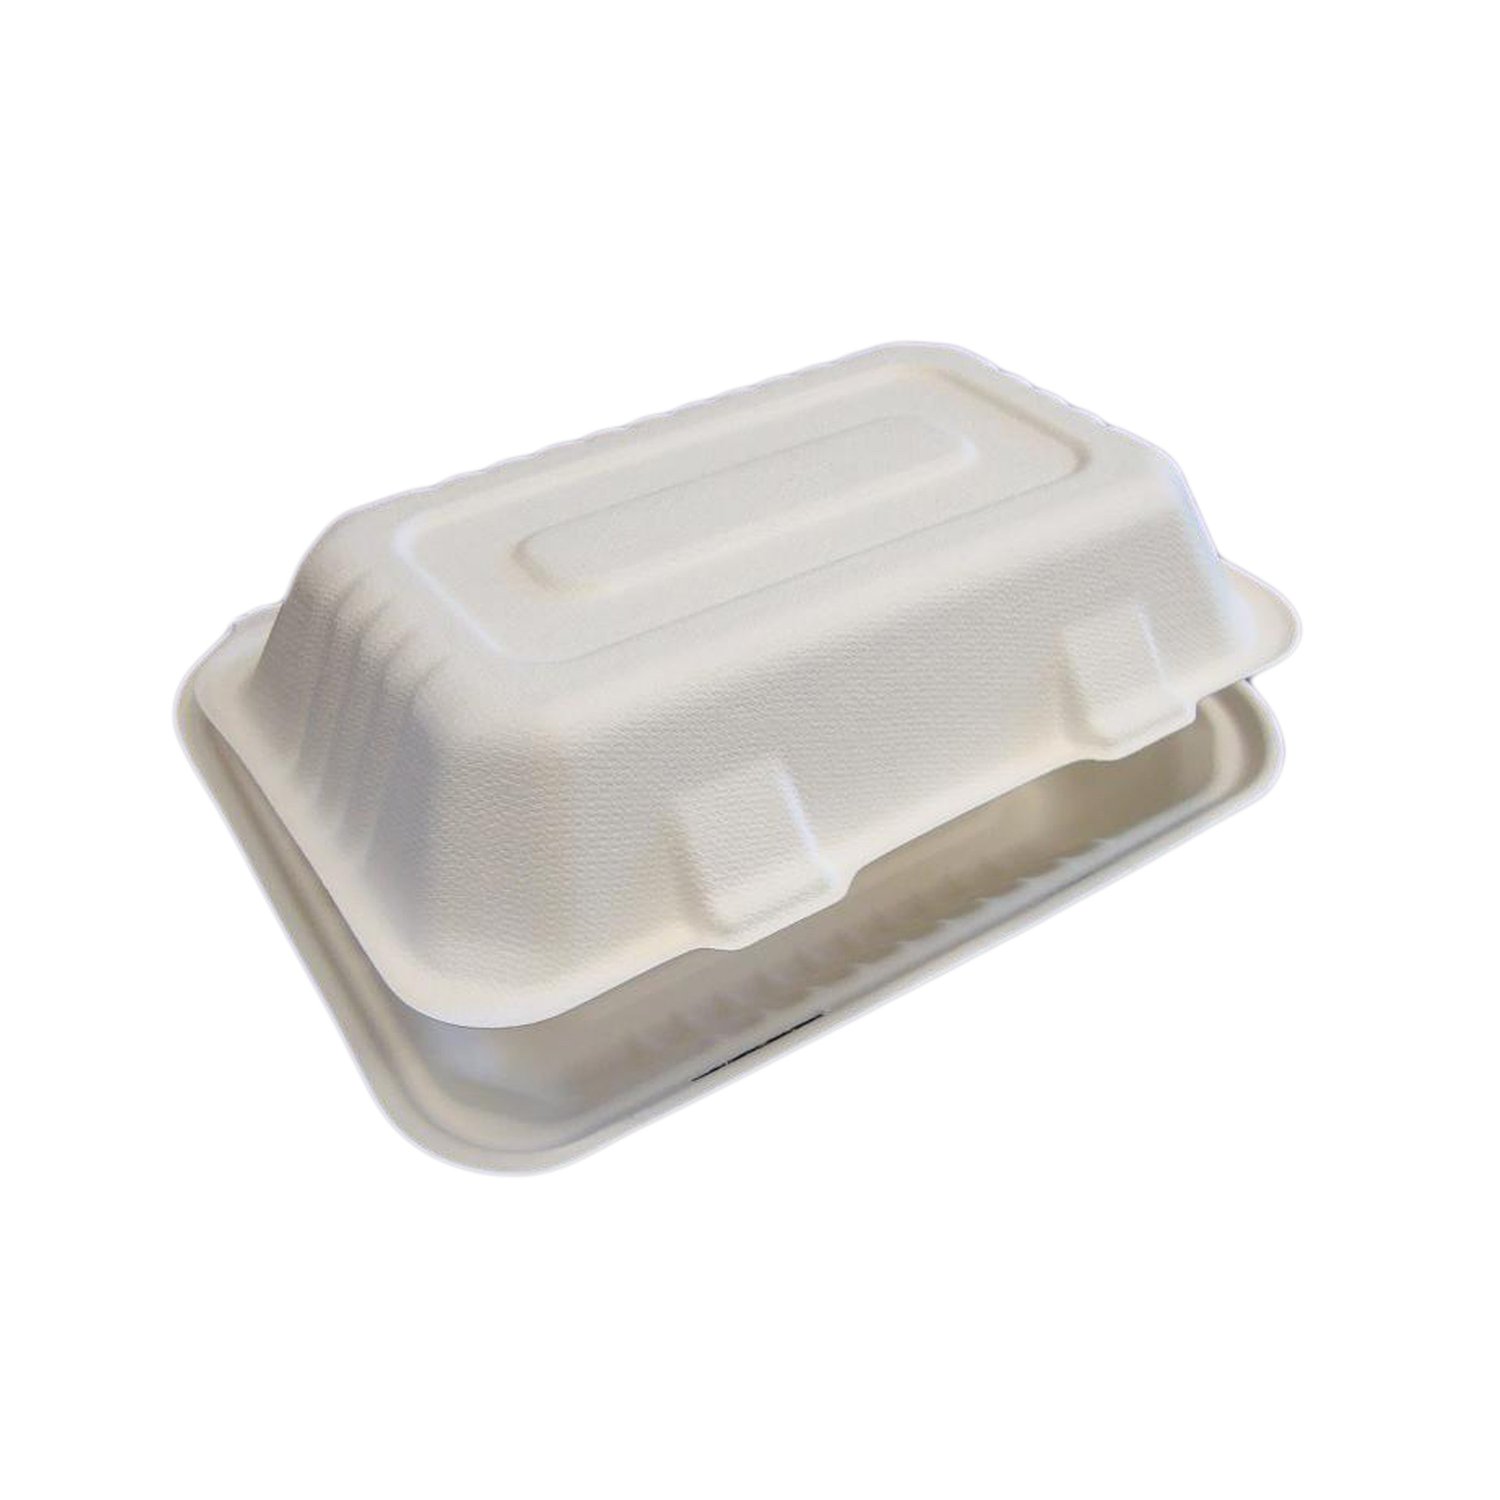 Primeware Small Molded Fiber Hinged Lid Containers, Case of 500